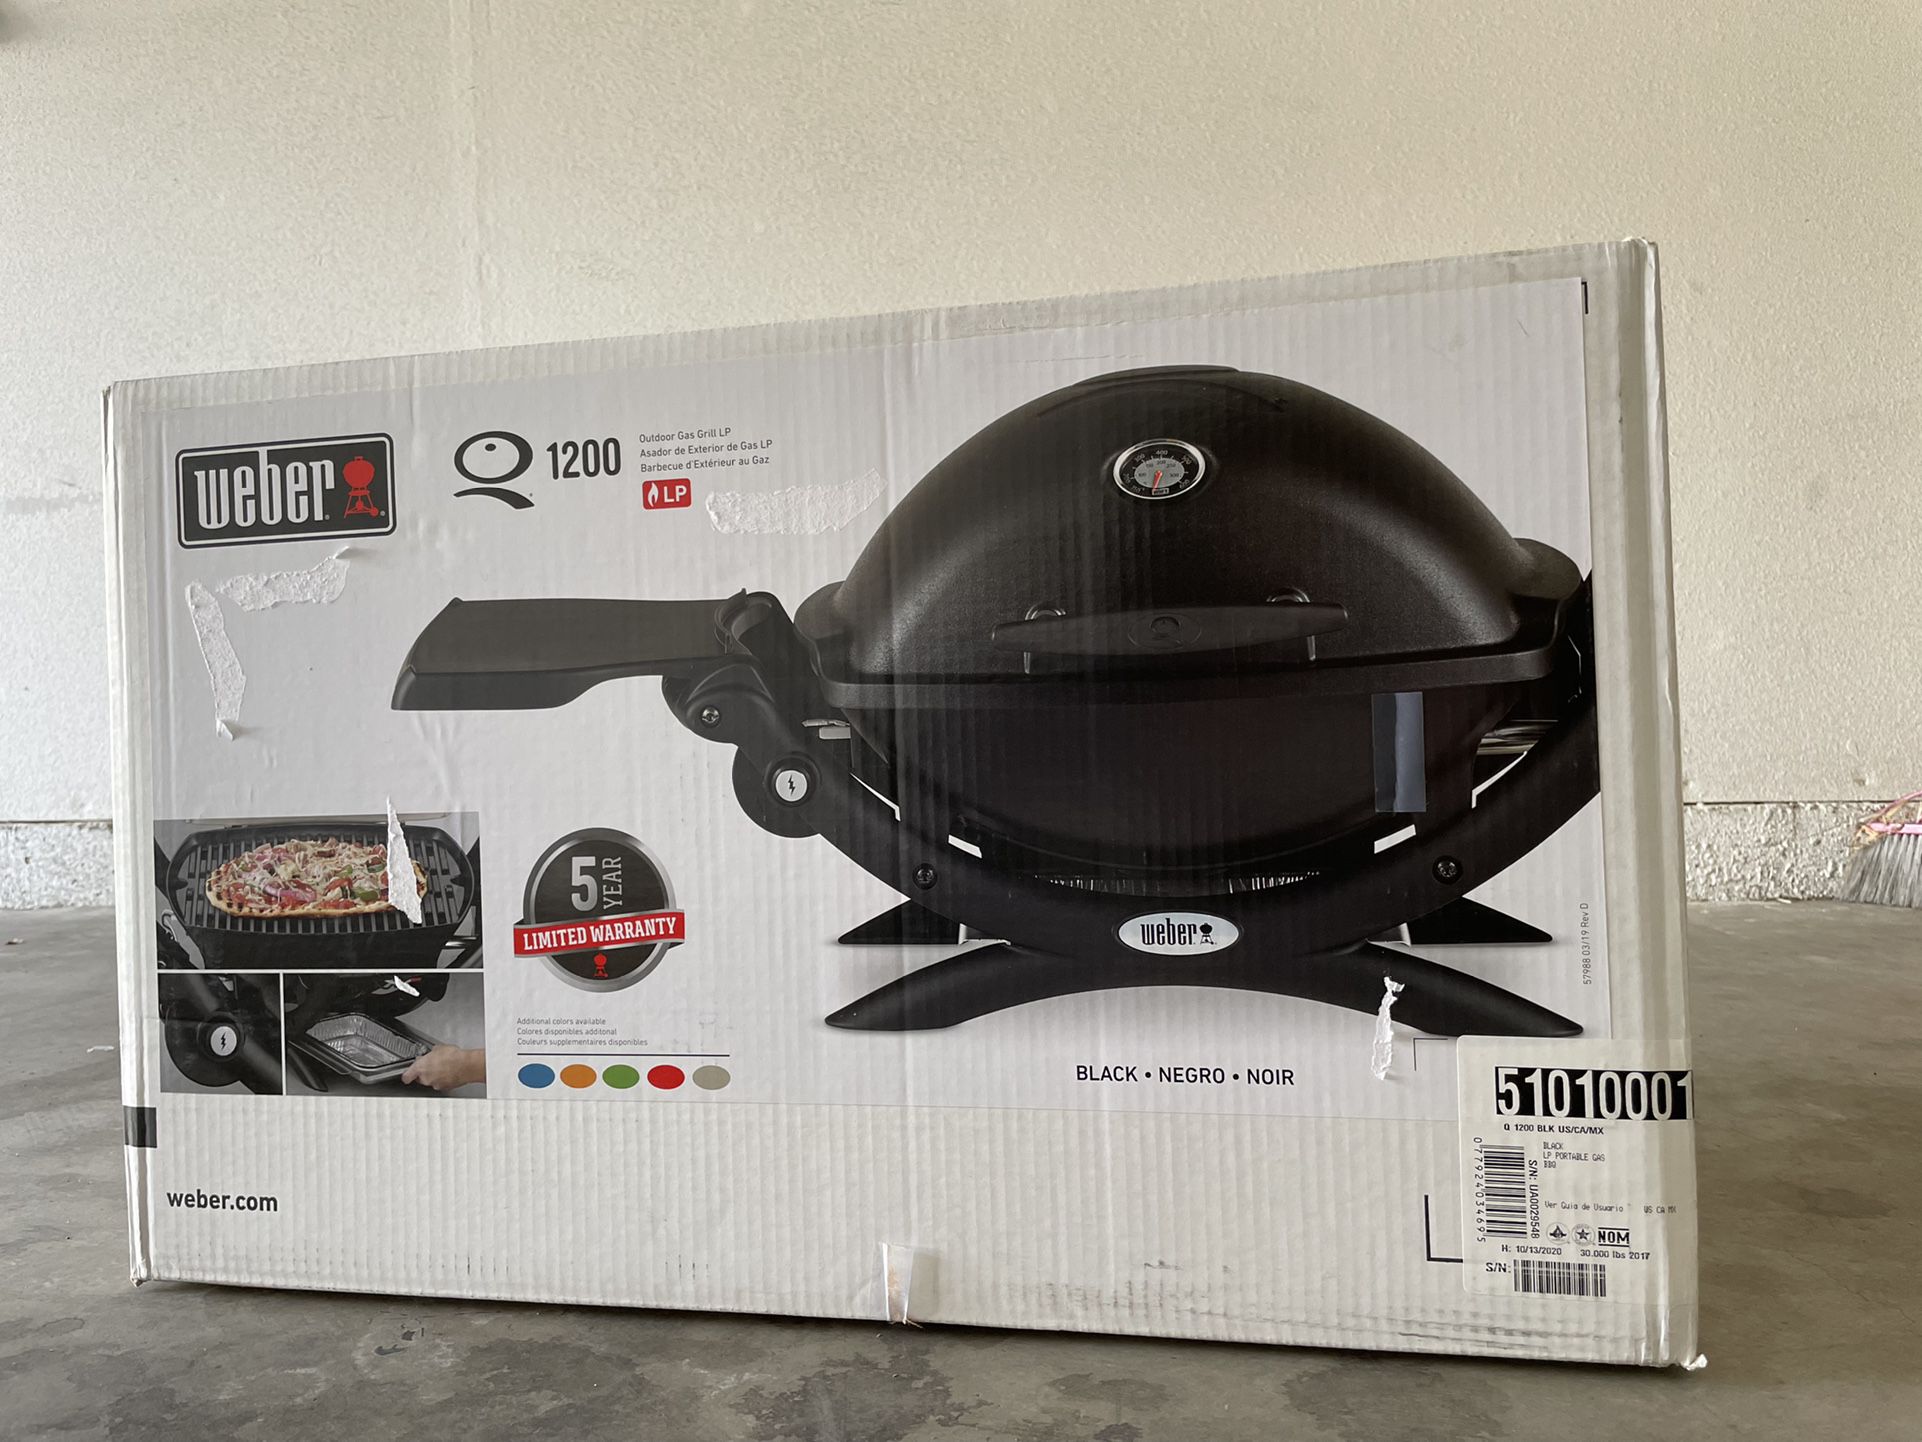 New Weber Q 1200 BBQ for in Irwindale, CA - OfferUp